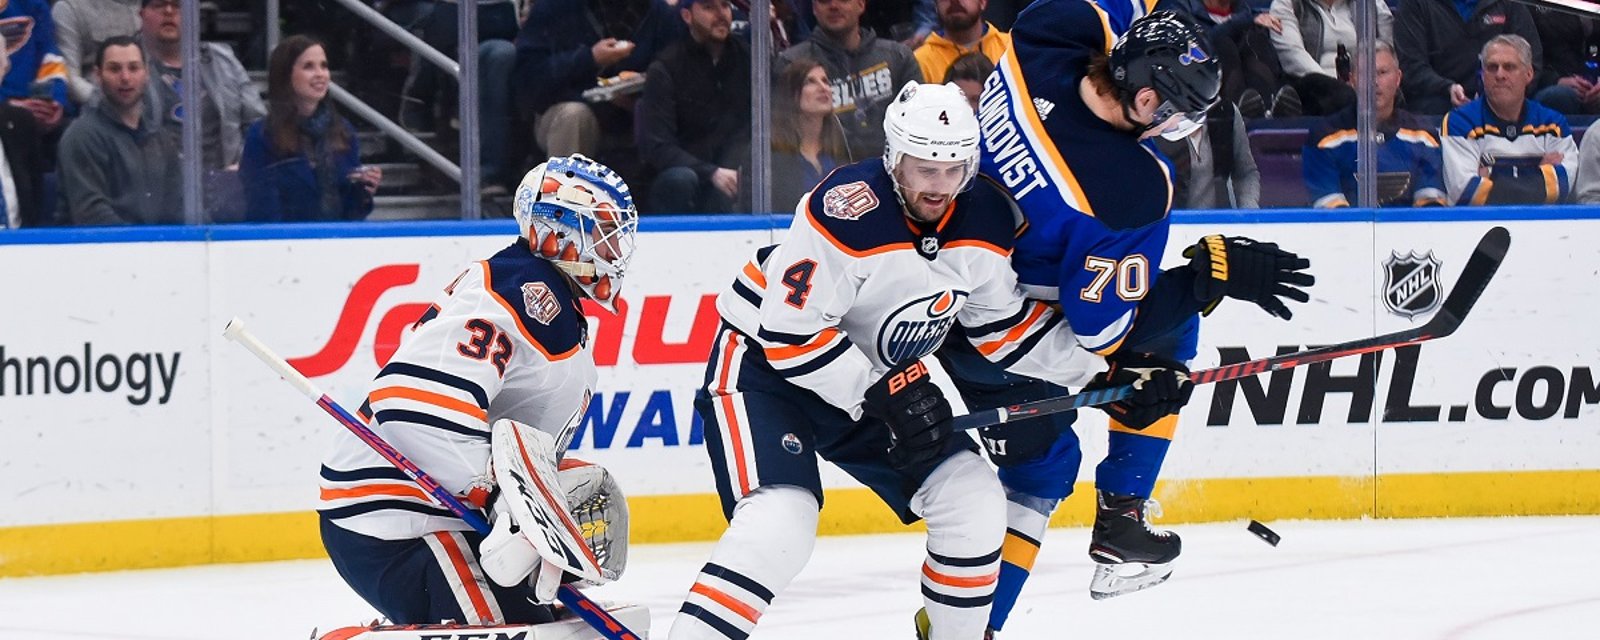 Oilers at risk of losing player they acquired in trade, for nothing.